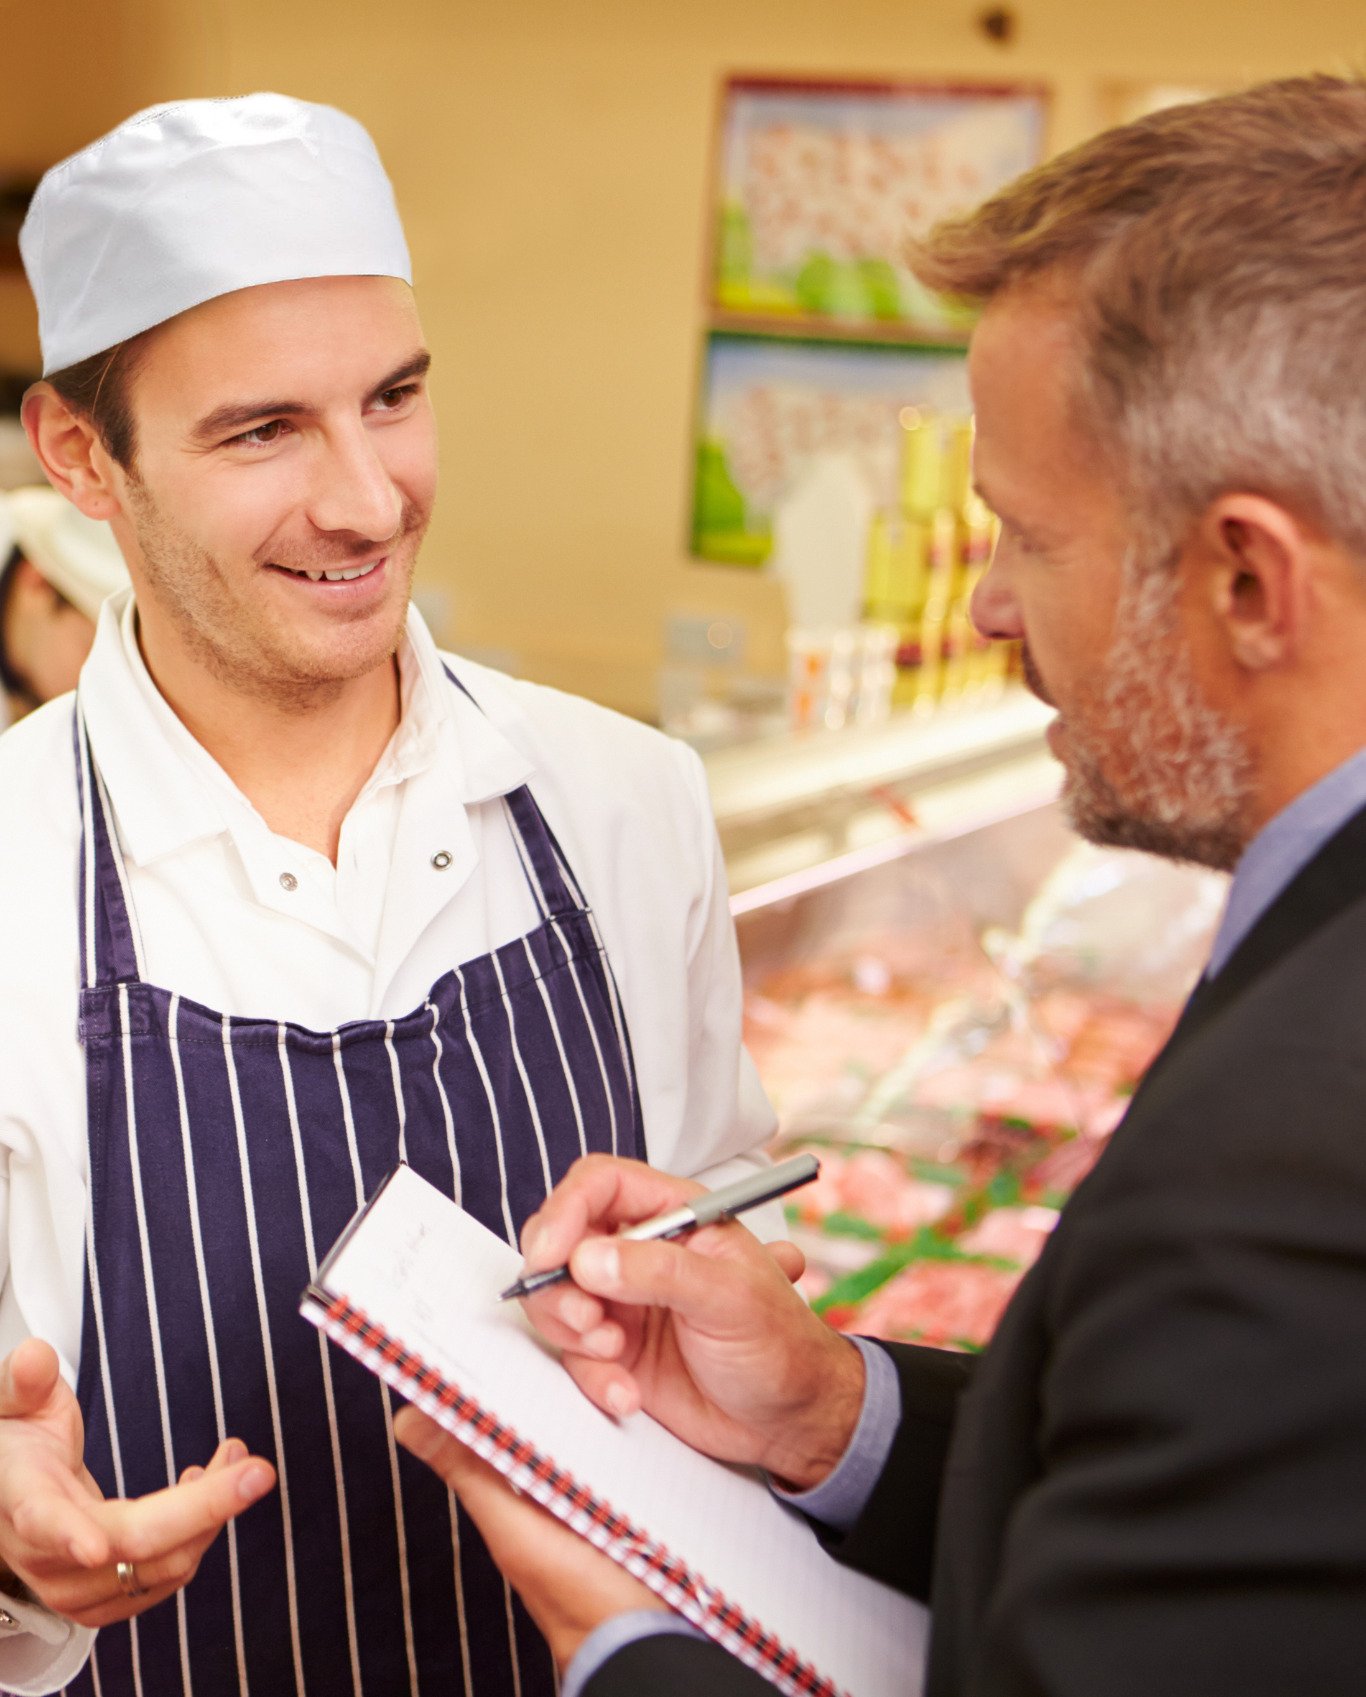 A researcher talks to a deli worker in a supermarket